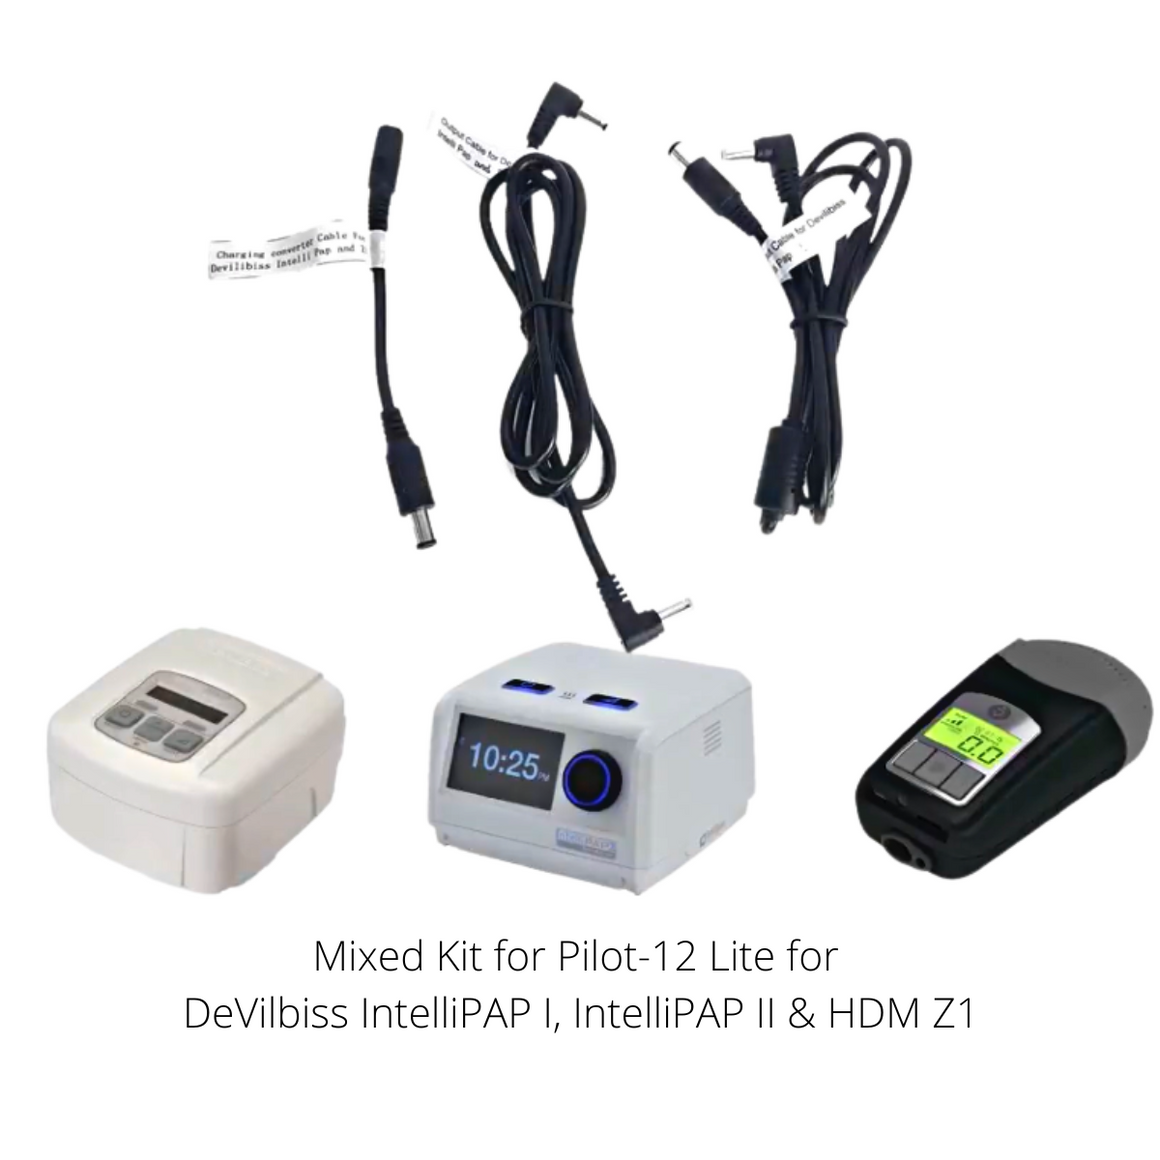 Mixed Kit For Pilot-12 Lite For HDM Z1/Z2, Intellipap I/II, and Devilbiss - CPAPmachines.ca